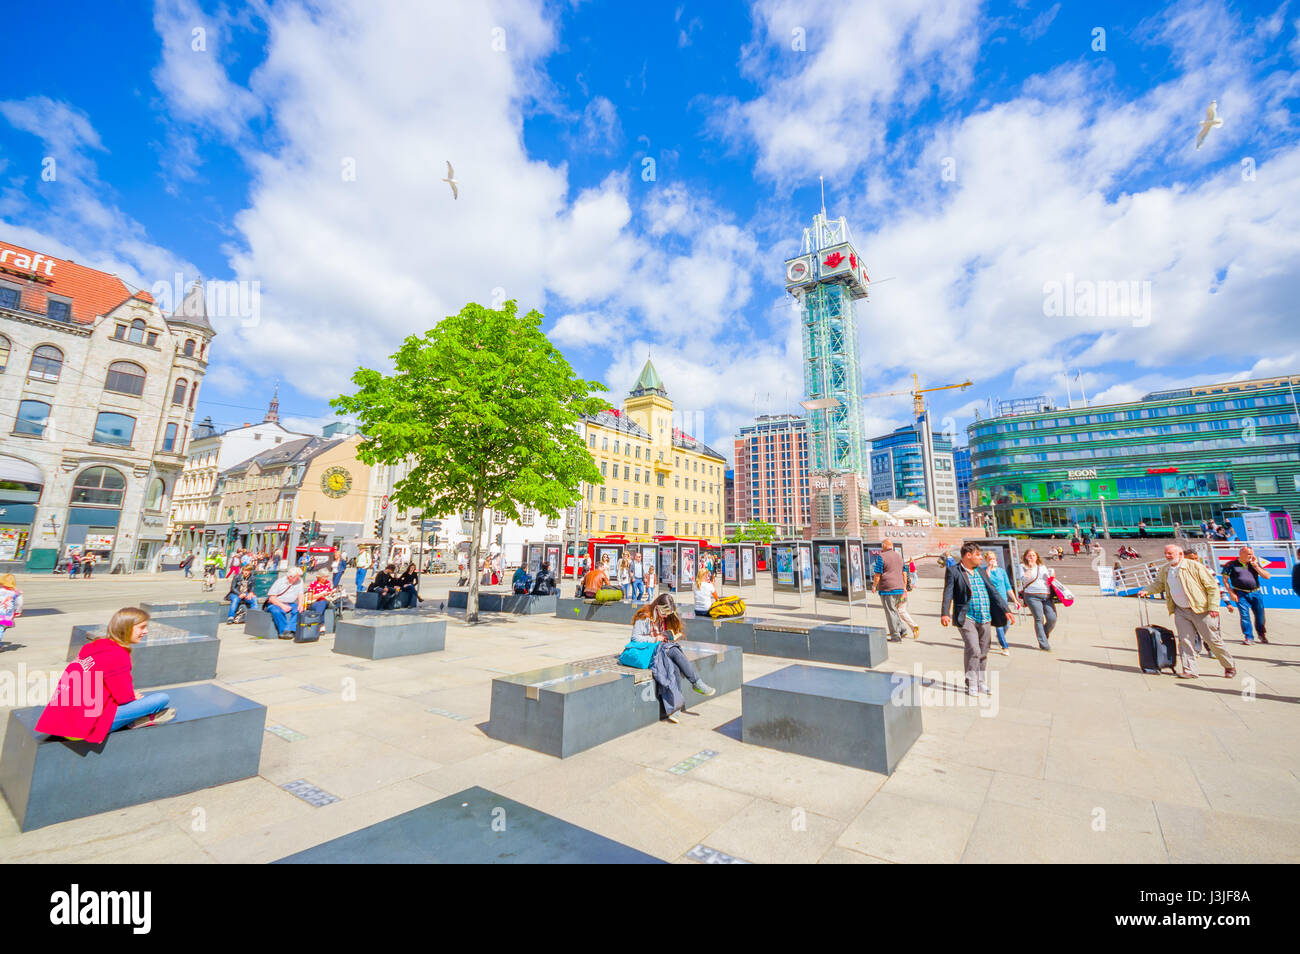 OSLO, NORWAY - 8 JULY, 2015: Plaza in front of Oslo Central station with people around on nice sunny day. Stock Photo